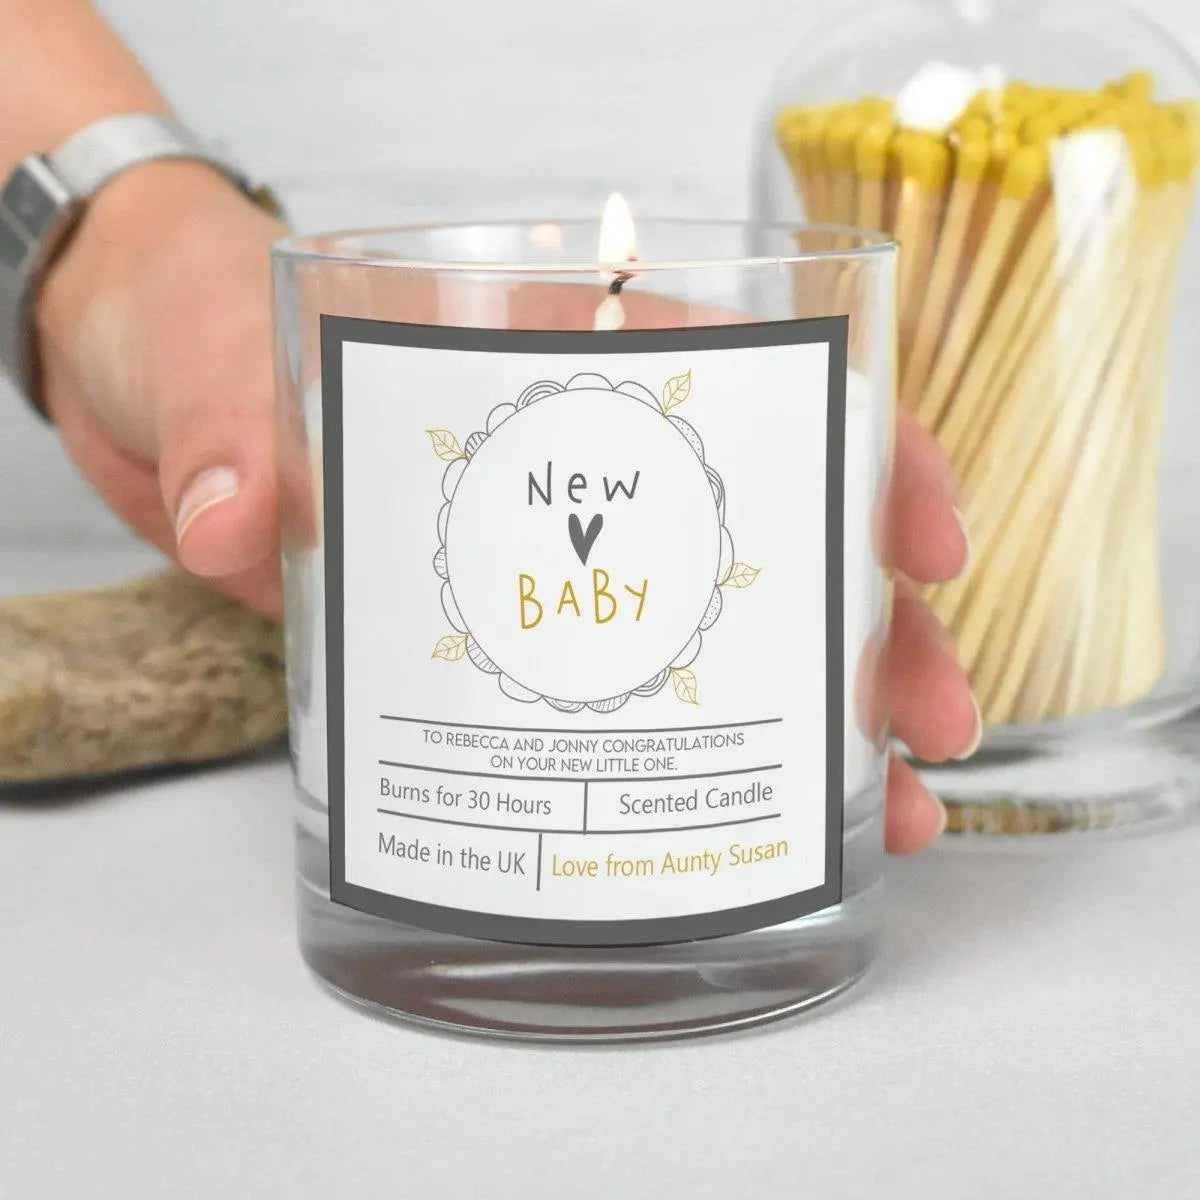 Personalised New Baby Candle, New Baby Gift, Congratulations Gift New Baby, New Mum Gift, Baby Shower Gift, Mum Gift, New Arrival Candle - Amy Lucy